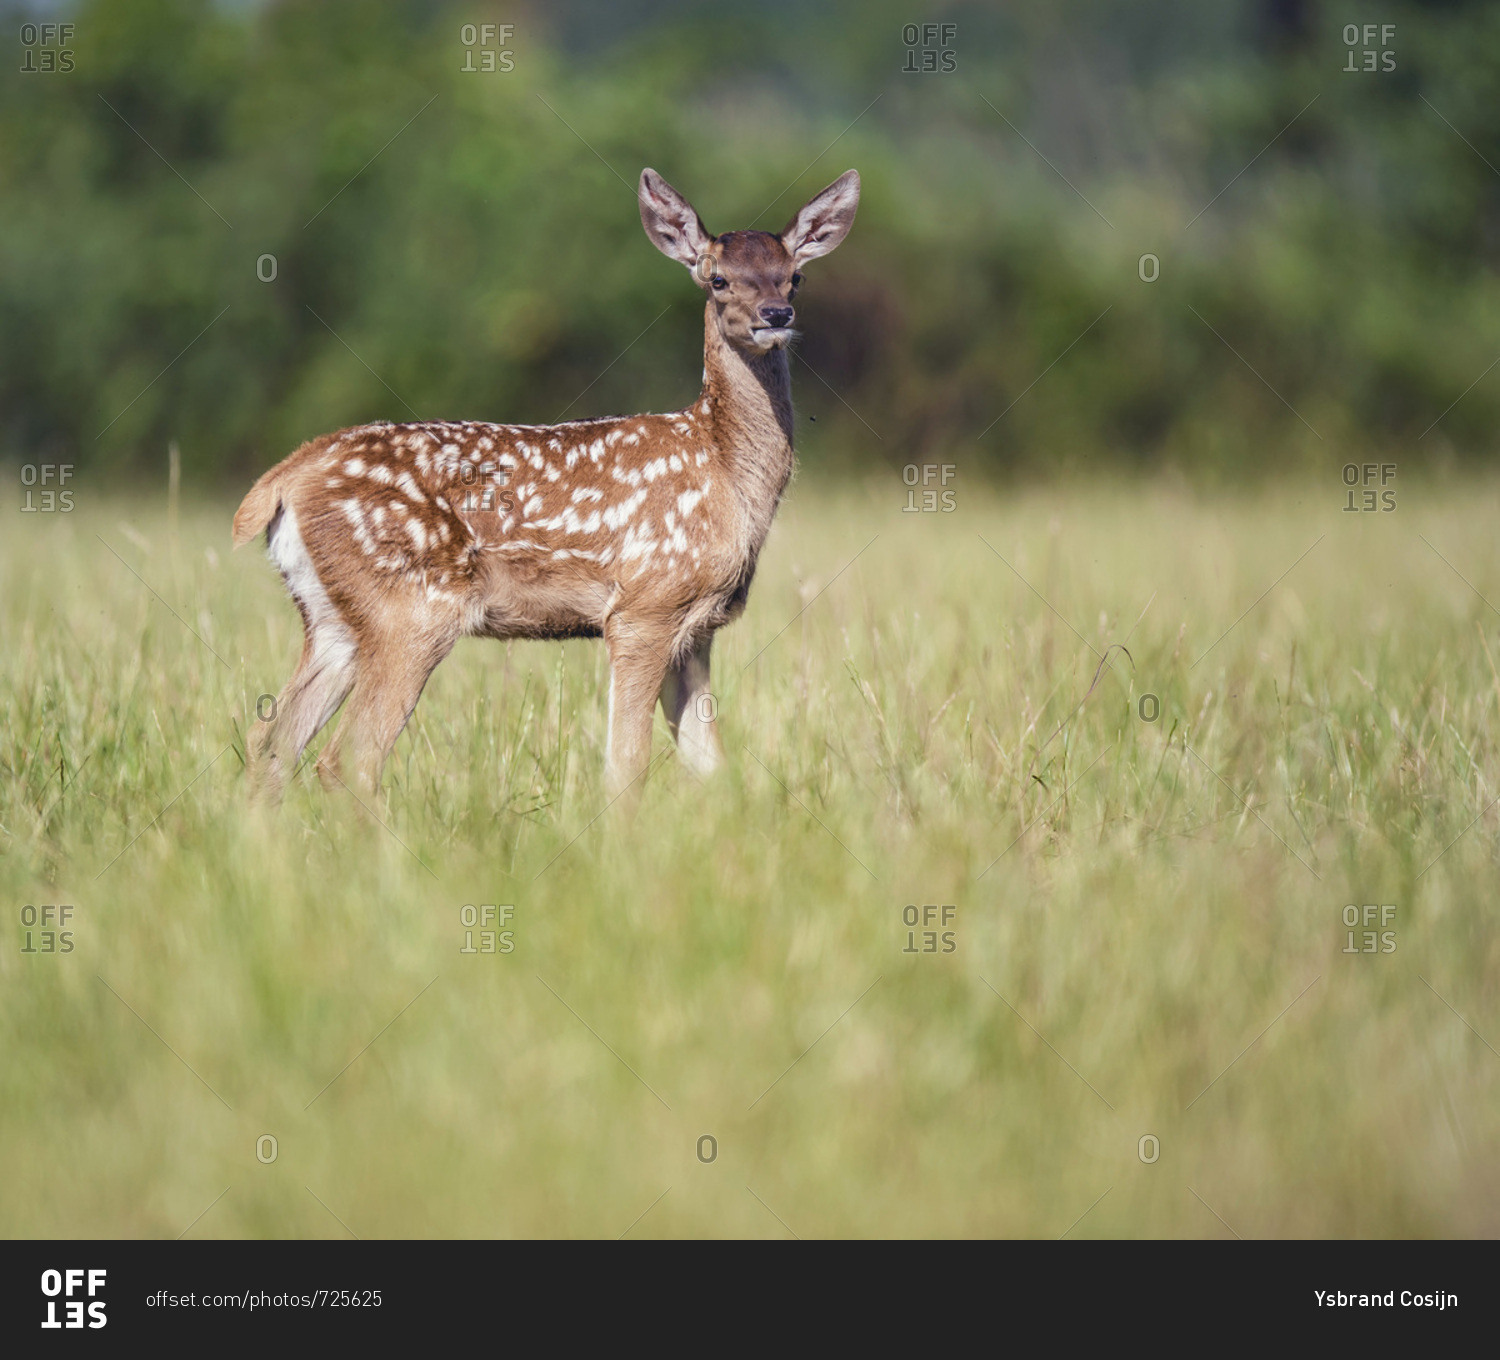 Portrait of a young deer in a field